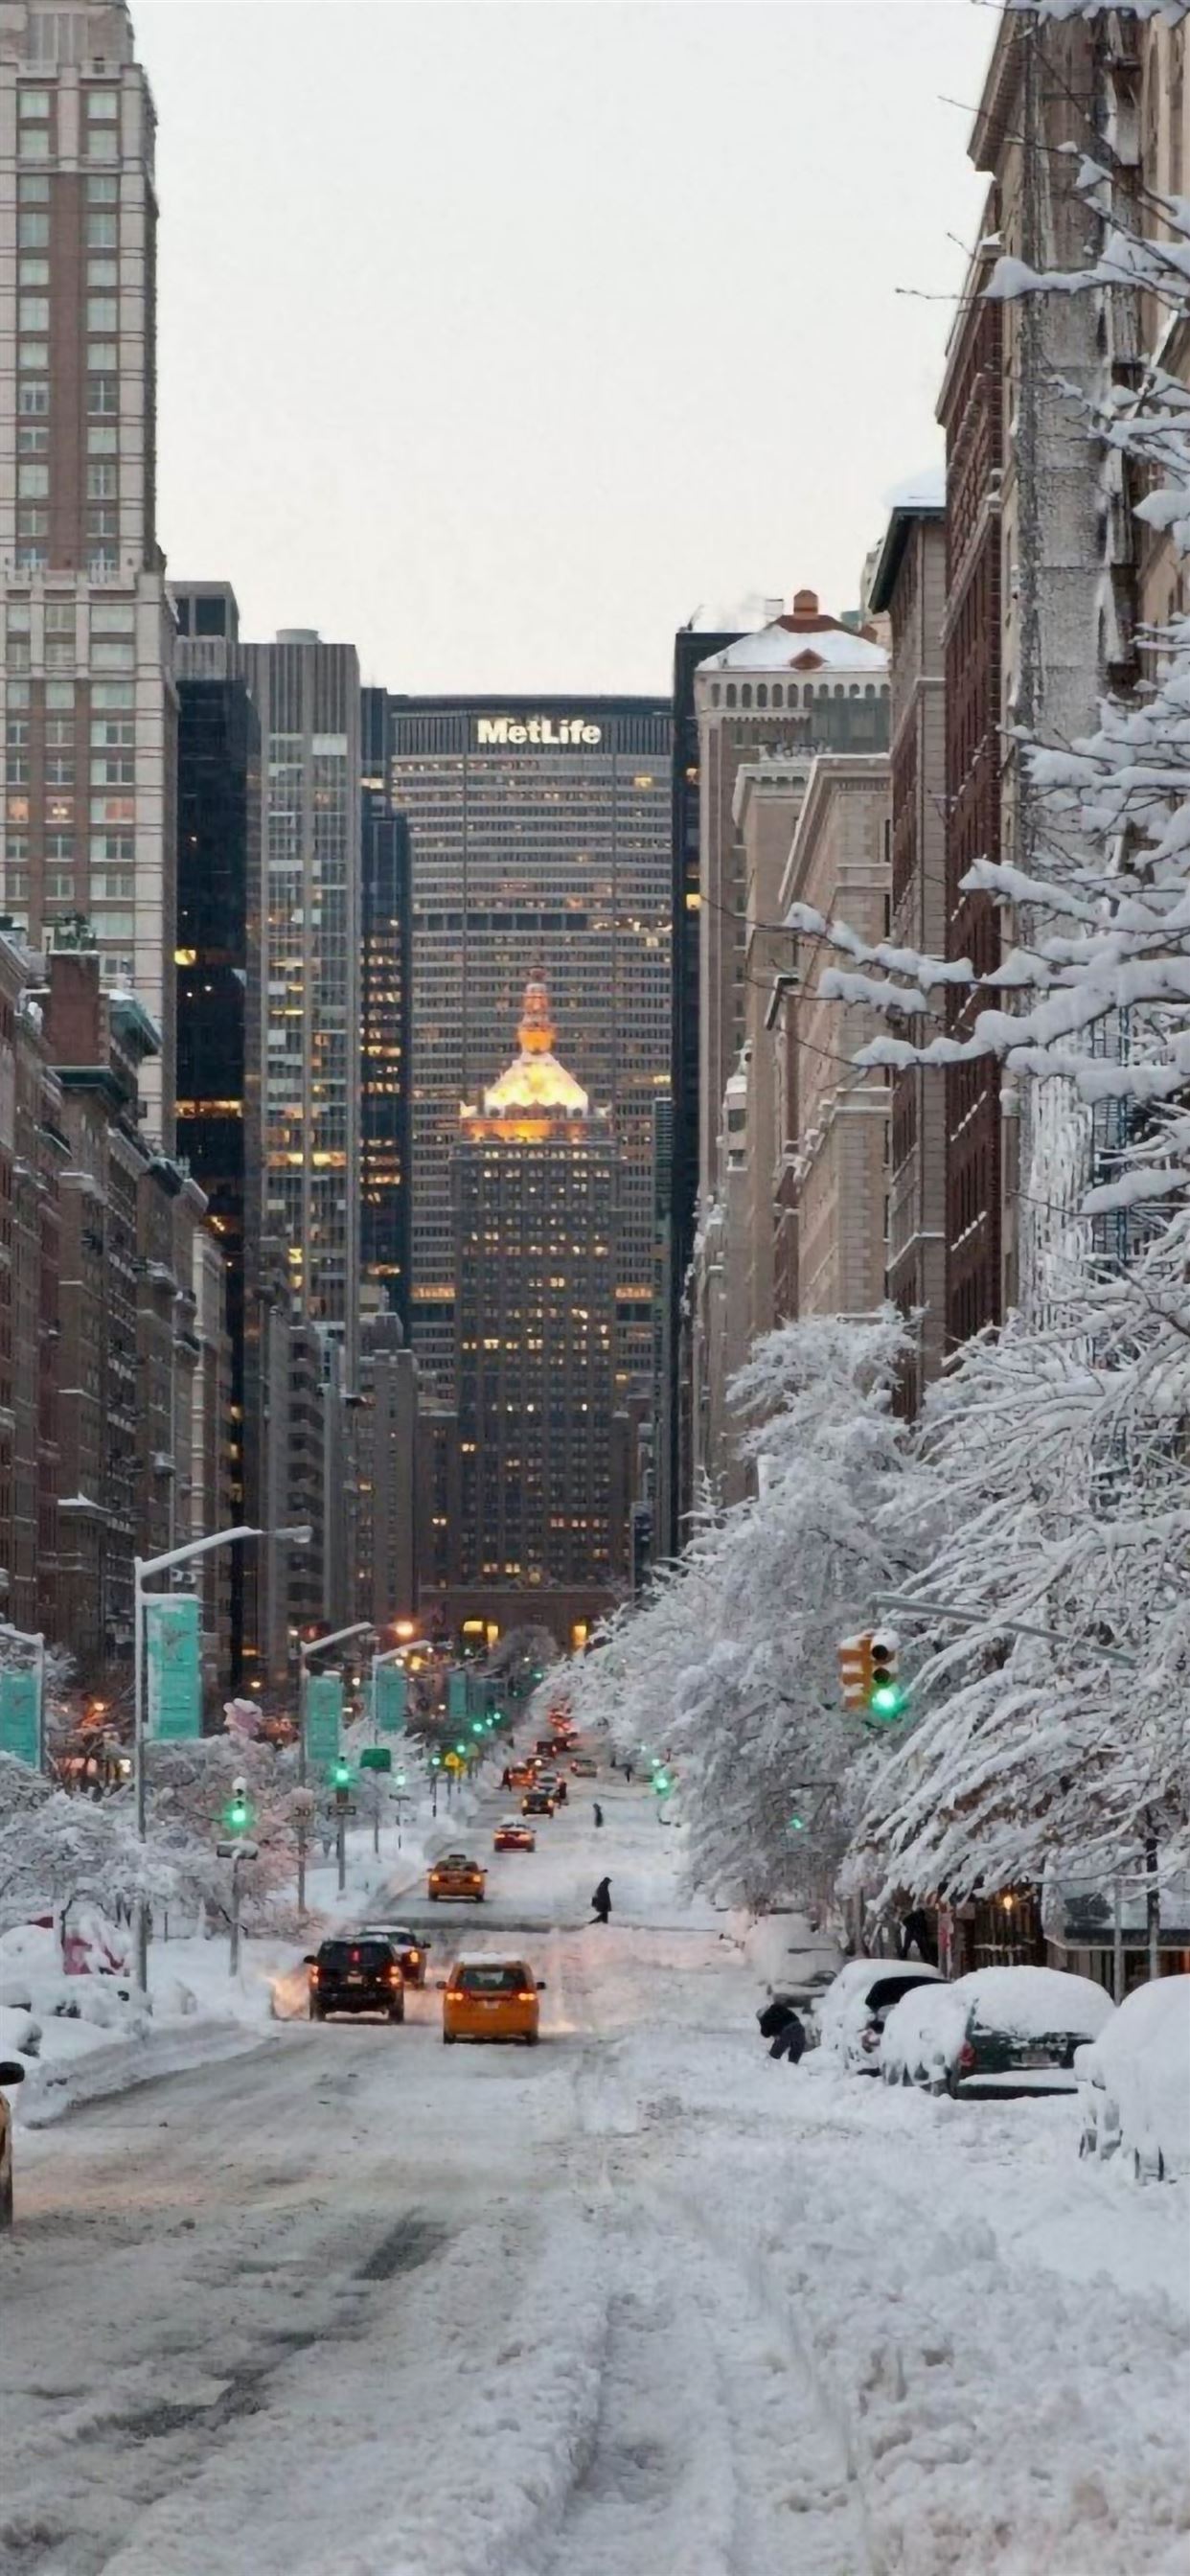 NY Winter Snow USA iPhone Wallpaper Free Download